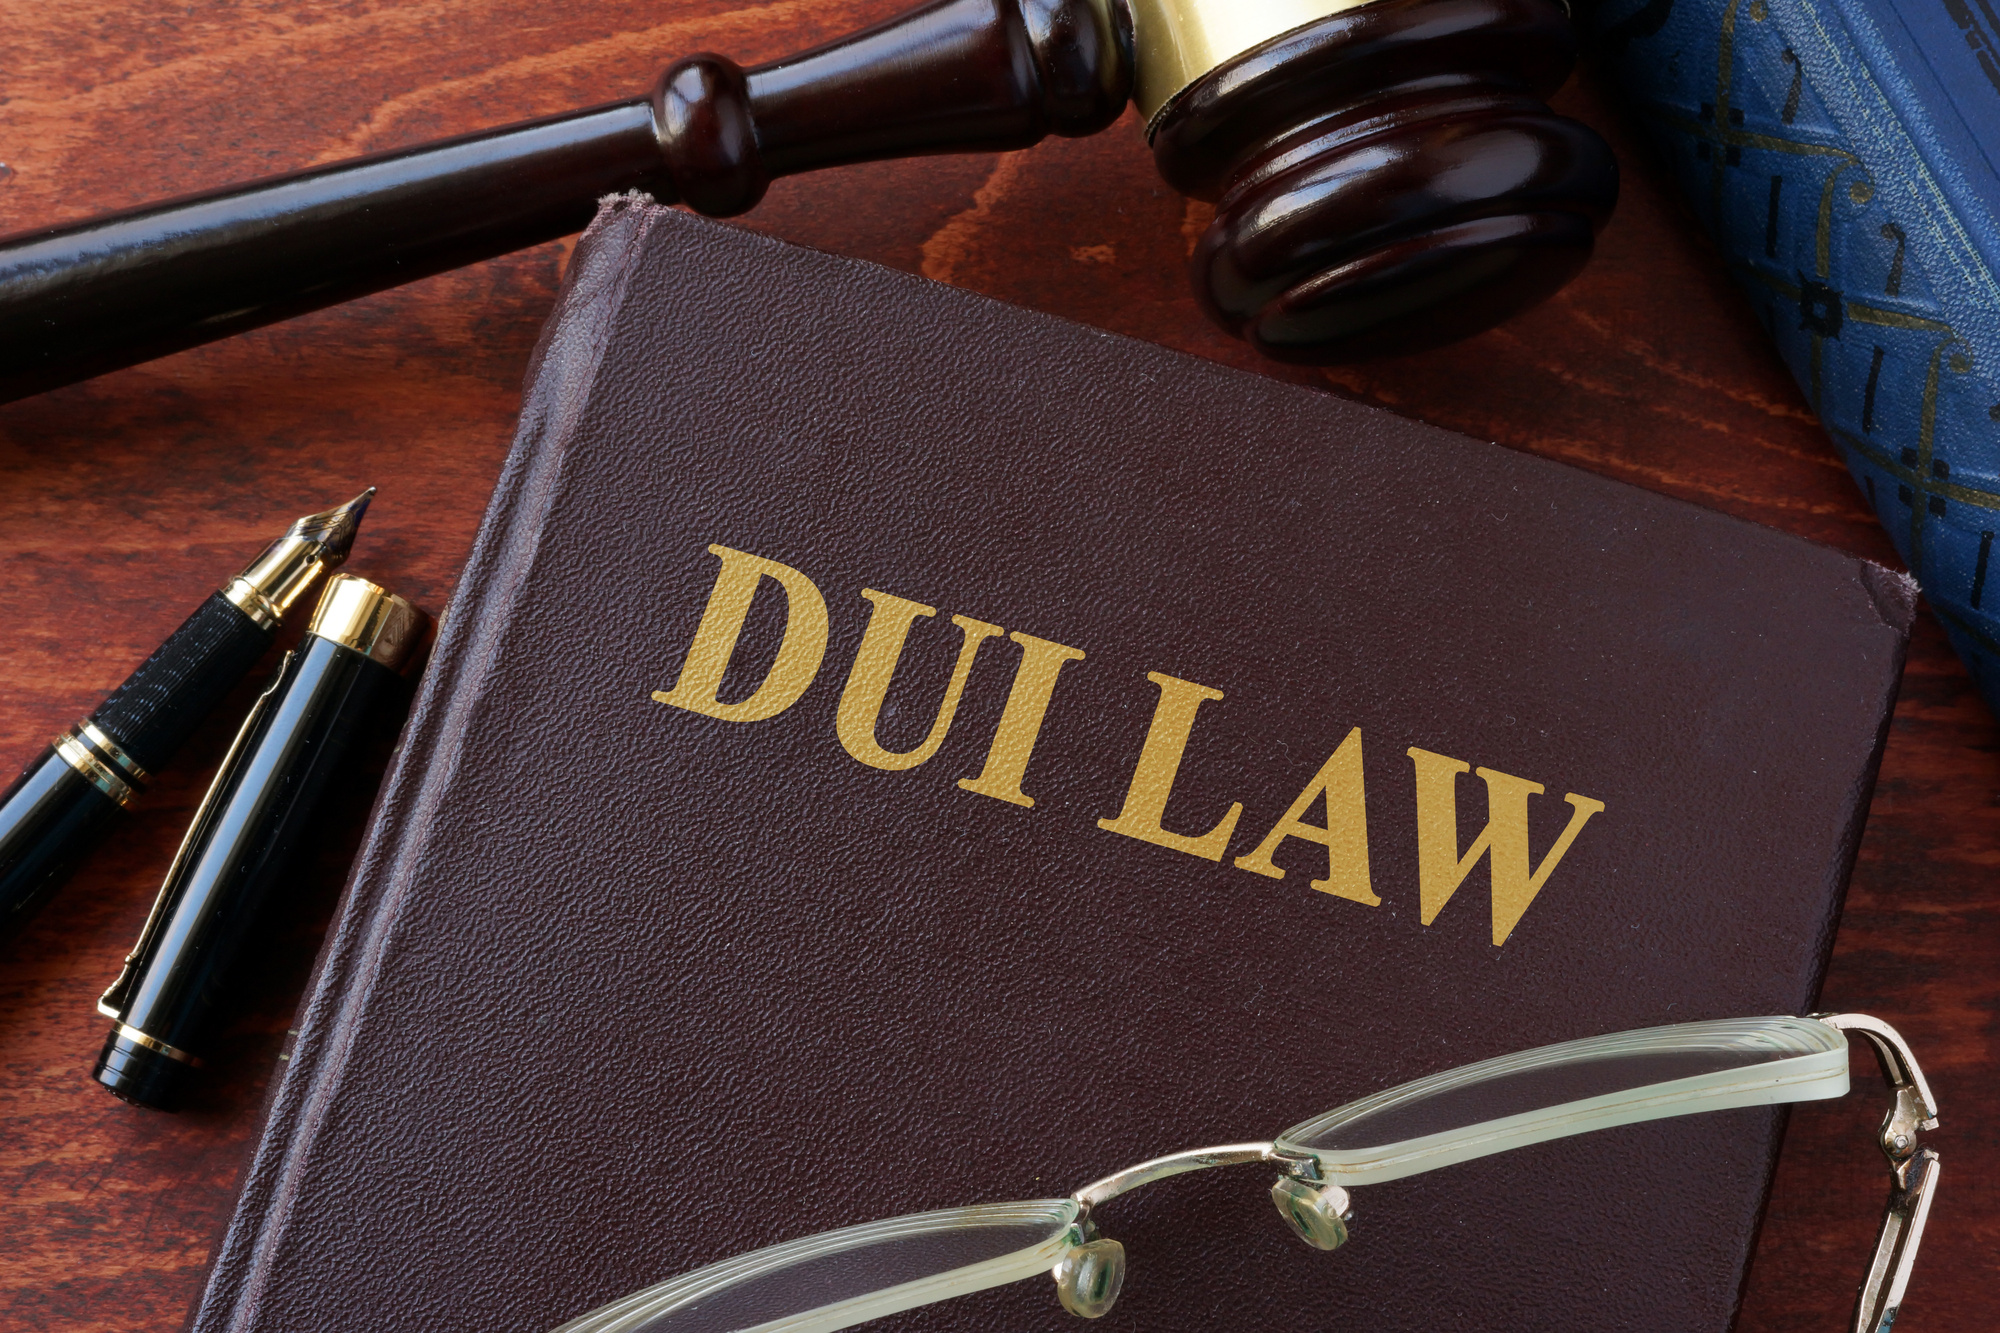 When a DUI offense can carry serious consequences, take these essential steps to protect your legal rights if you're charged with DUI.